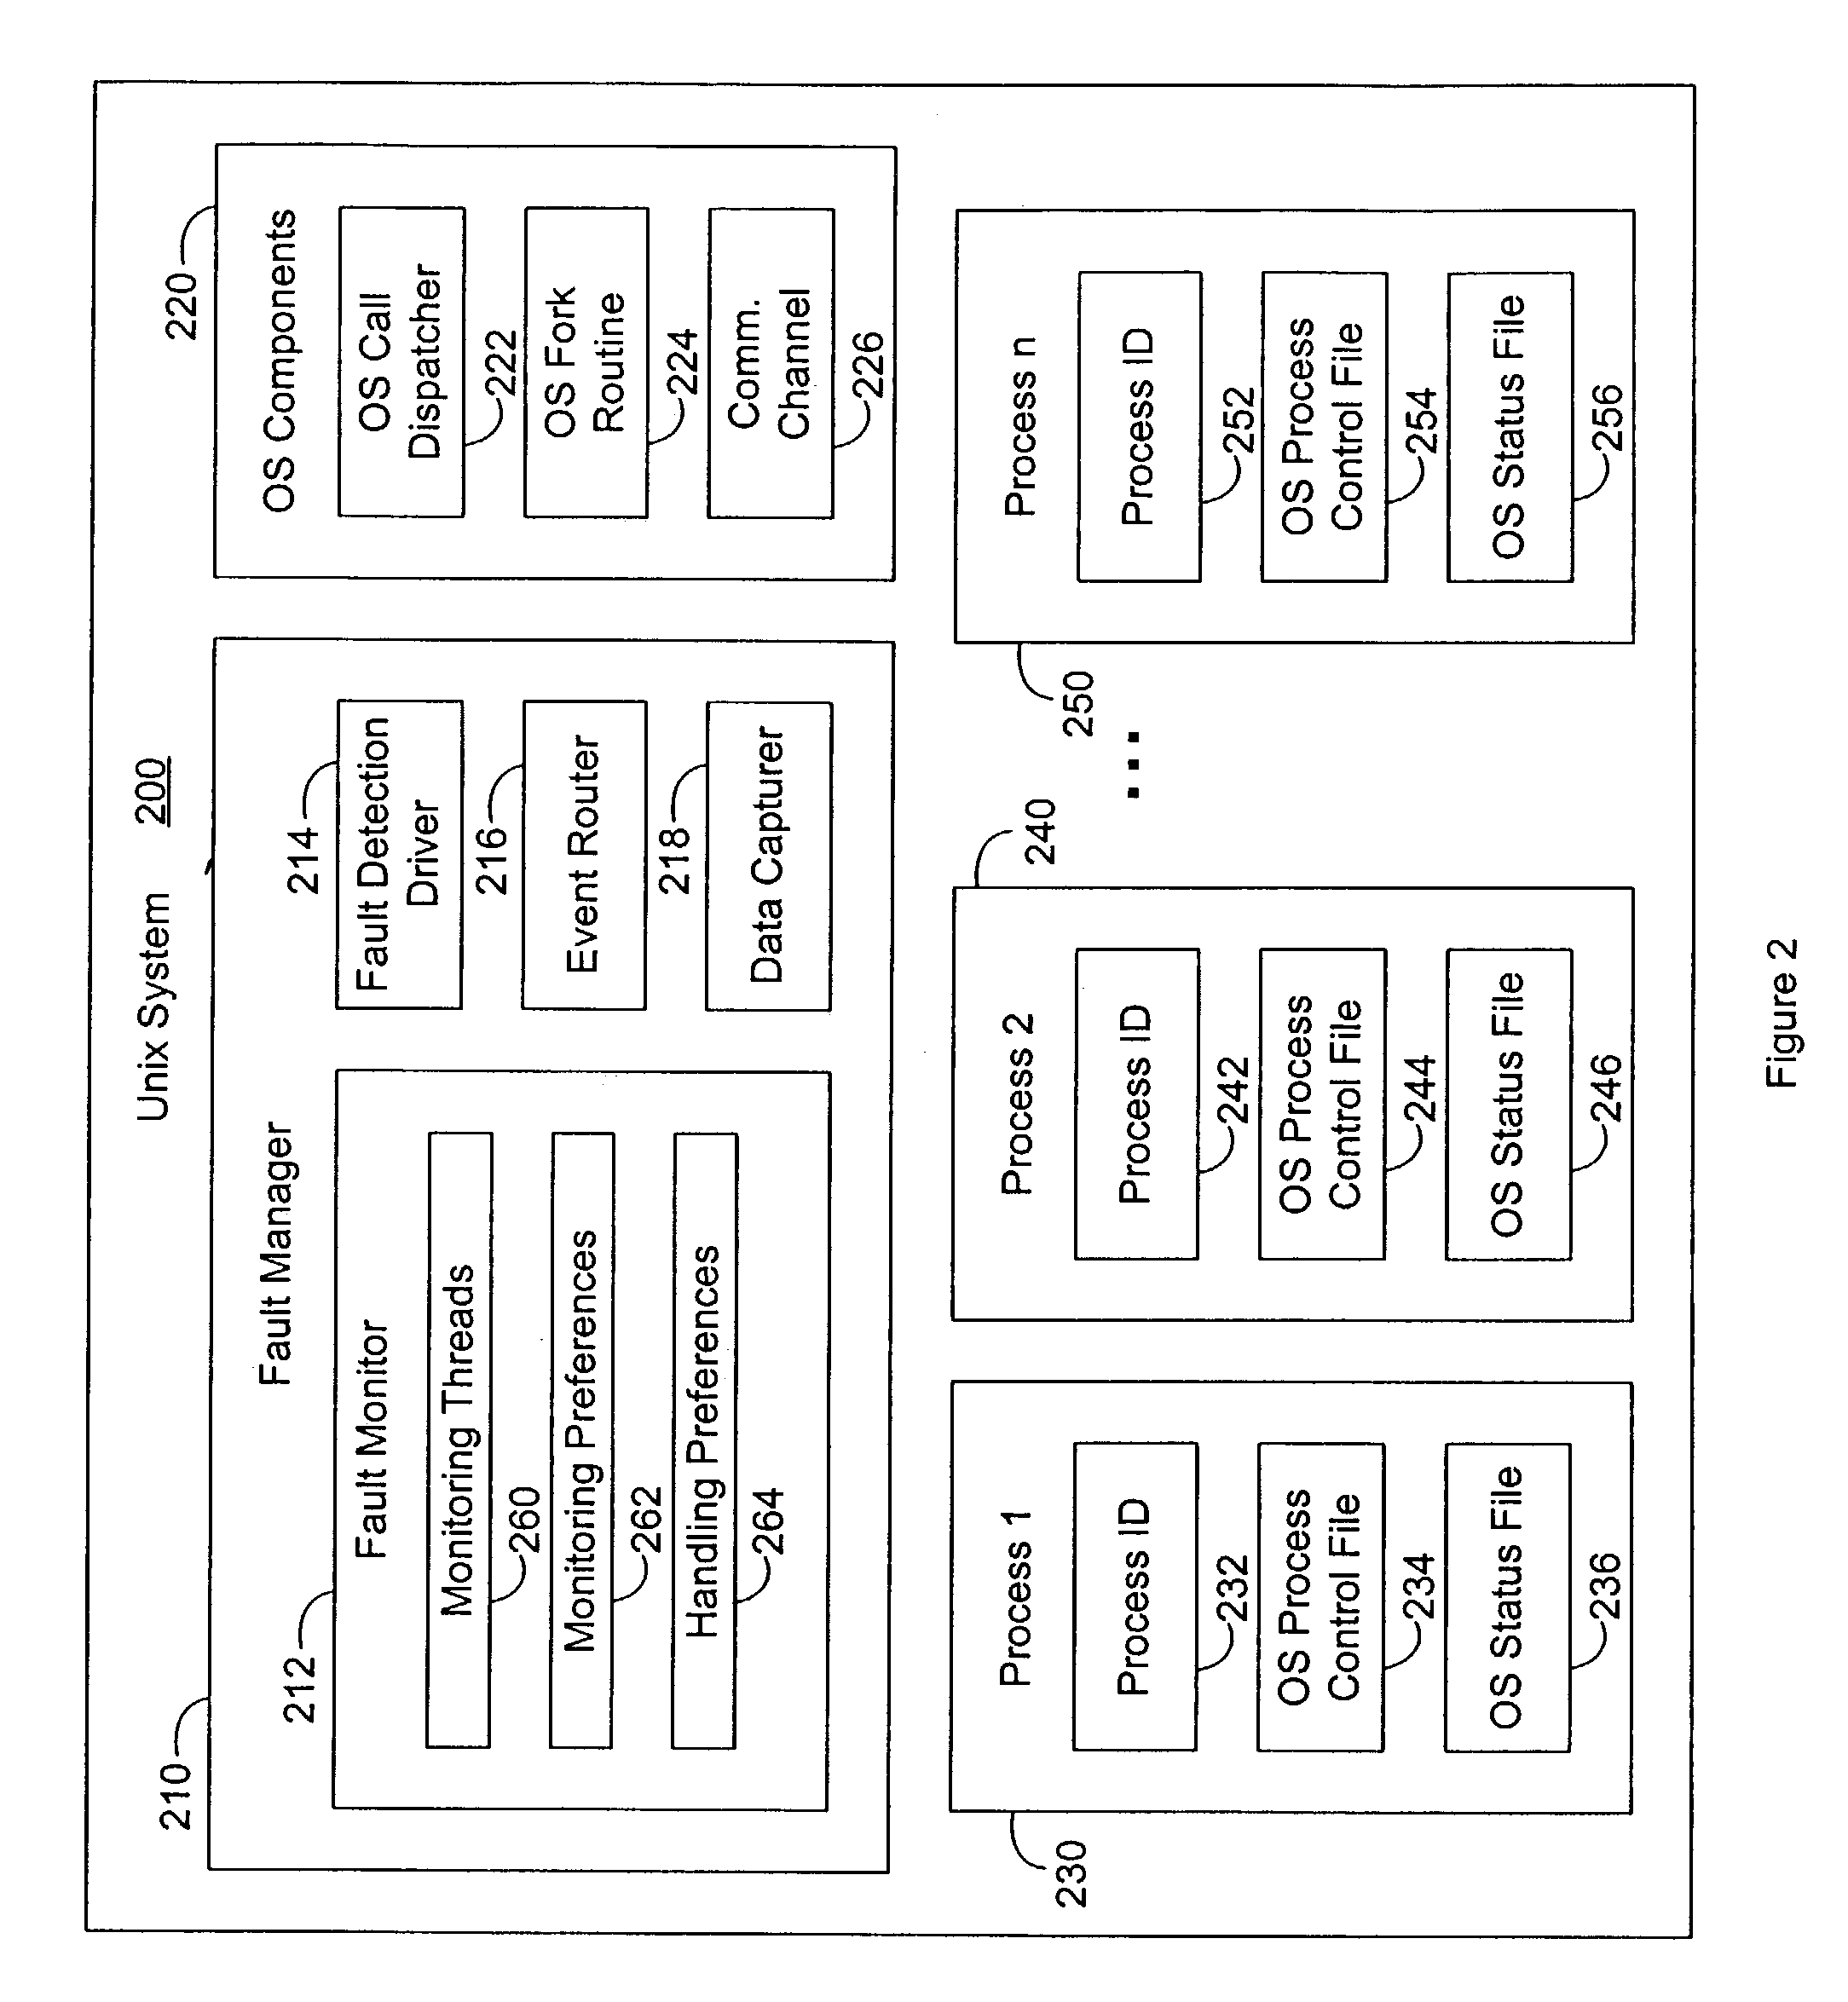 System and method of fault detection in a Unix environment